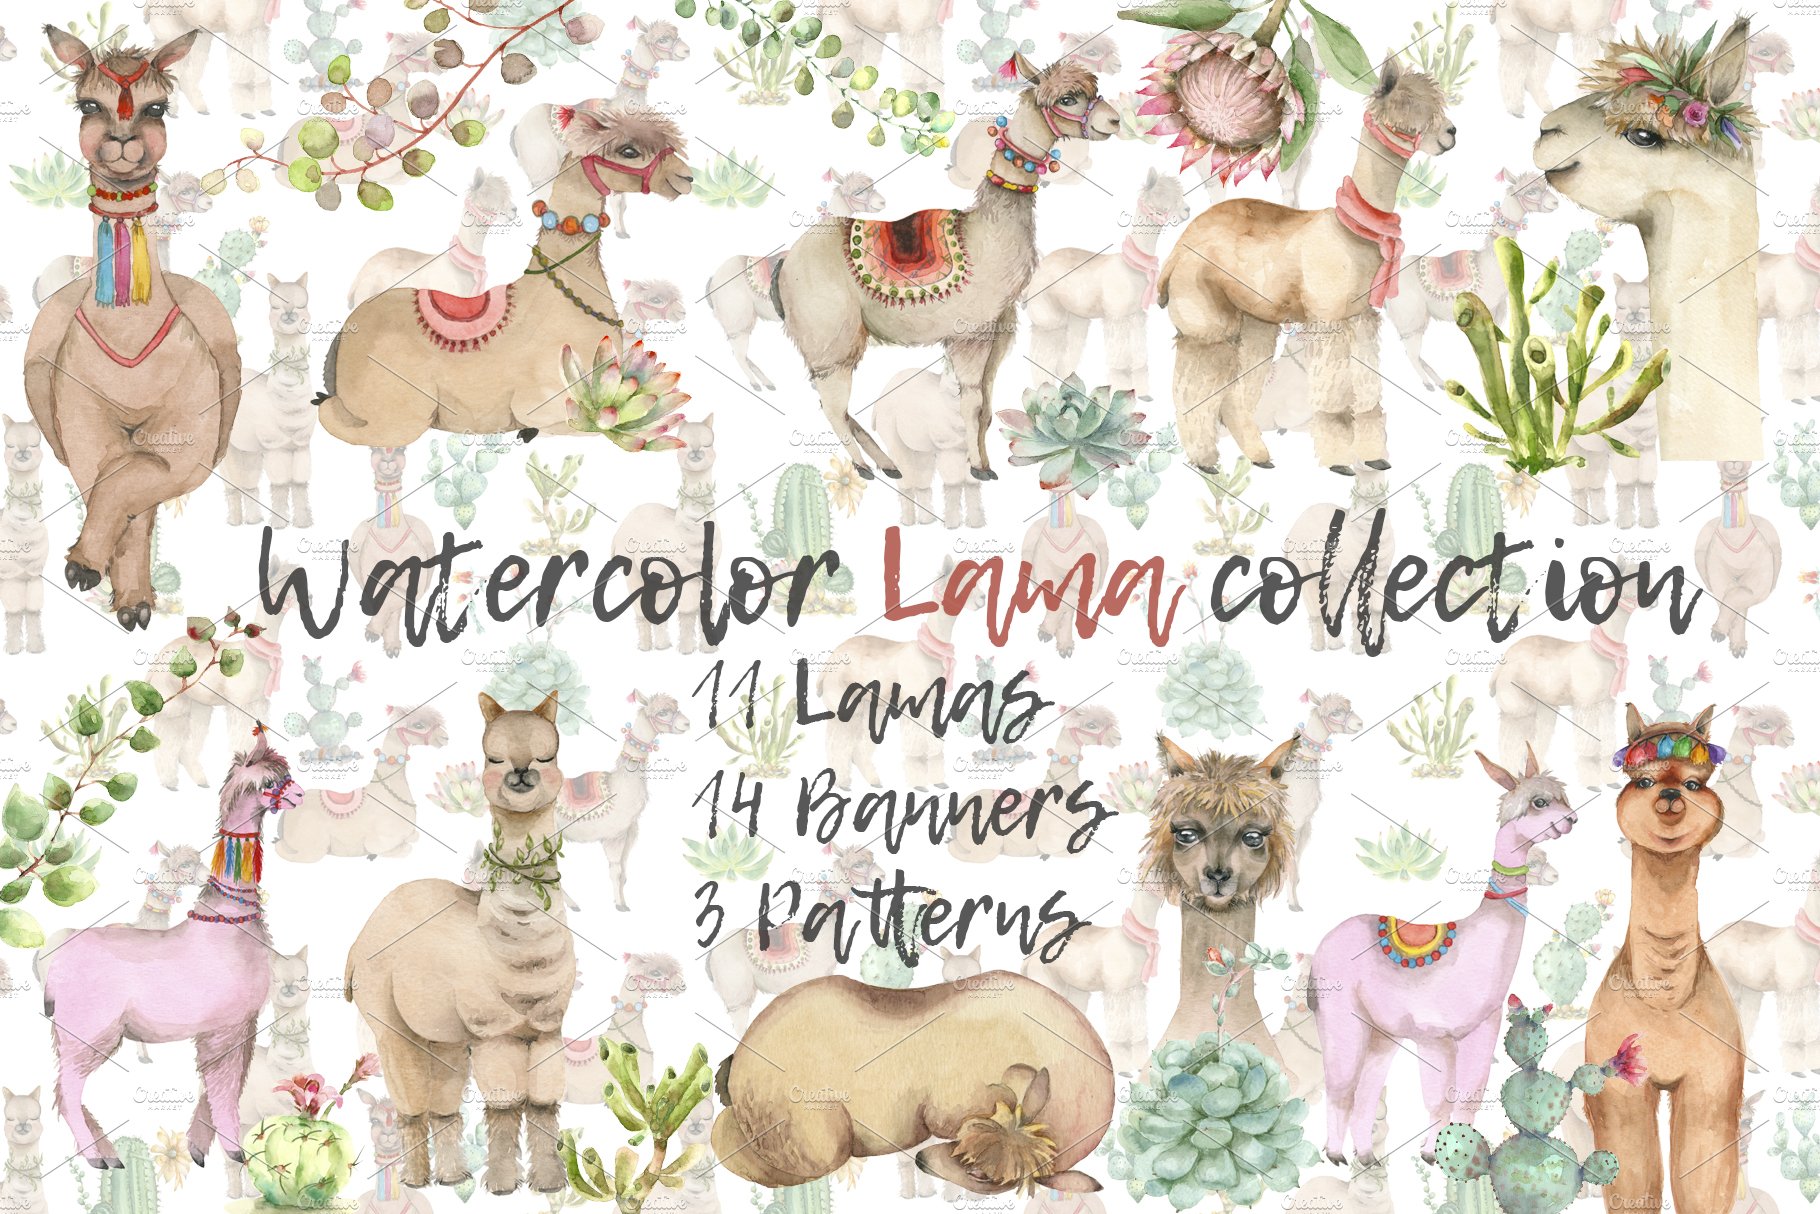 Lama in cactus collection cover image.